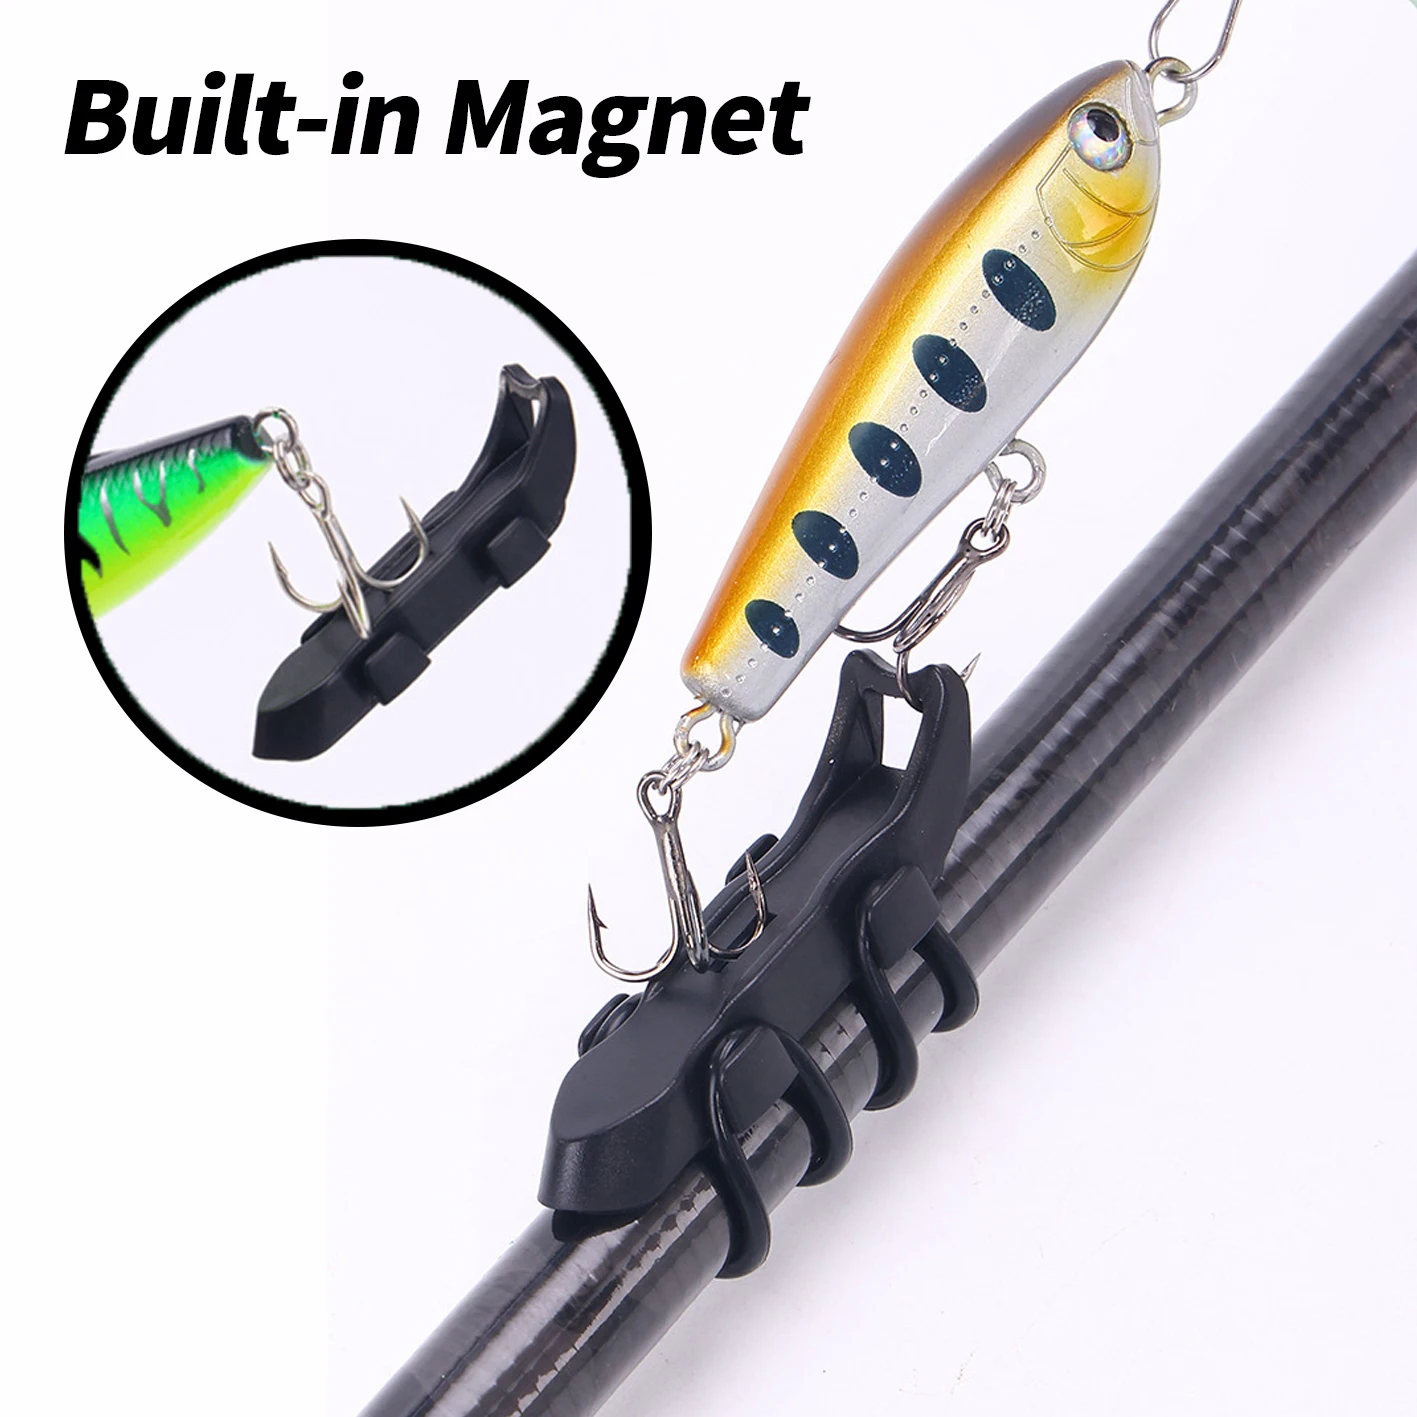 https://ae01.alicdn.com/kf/Sf25c47b463404ed8b2705d1e245385b3R/Magnetic-Fishing-Rod-Lure-Bait-Hook-Secure-Keeper-Holder-Protector-with-4-Rubber-Rings-Fixed-Lure.jpg